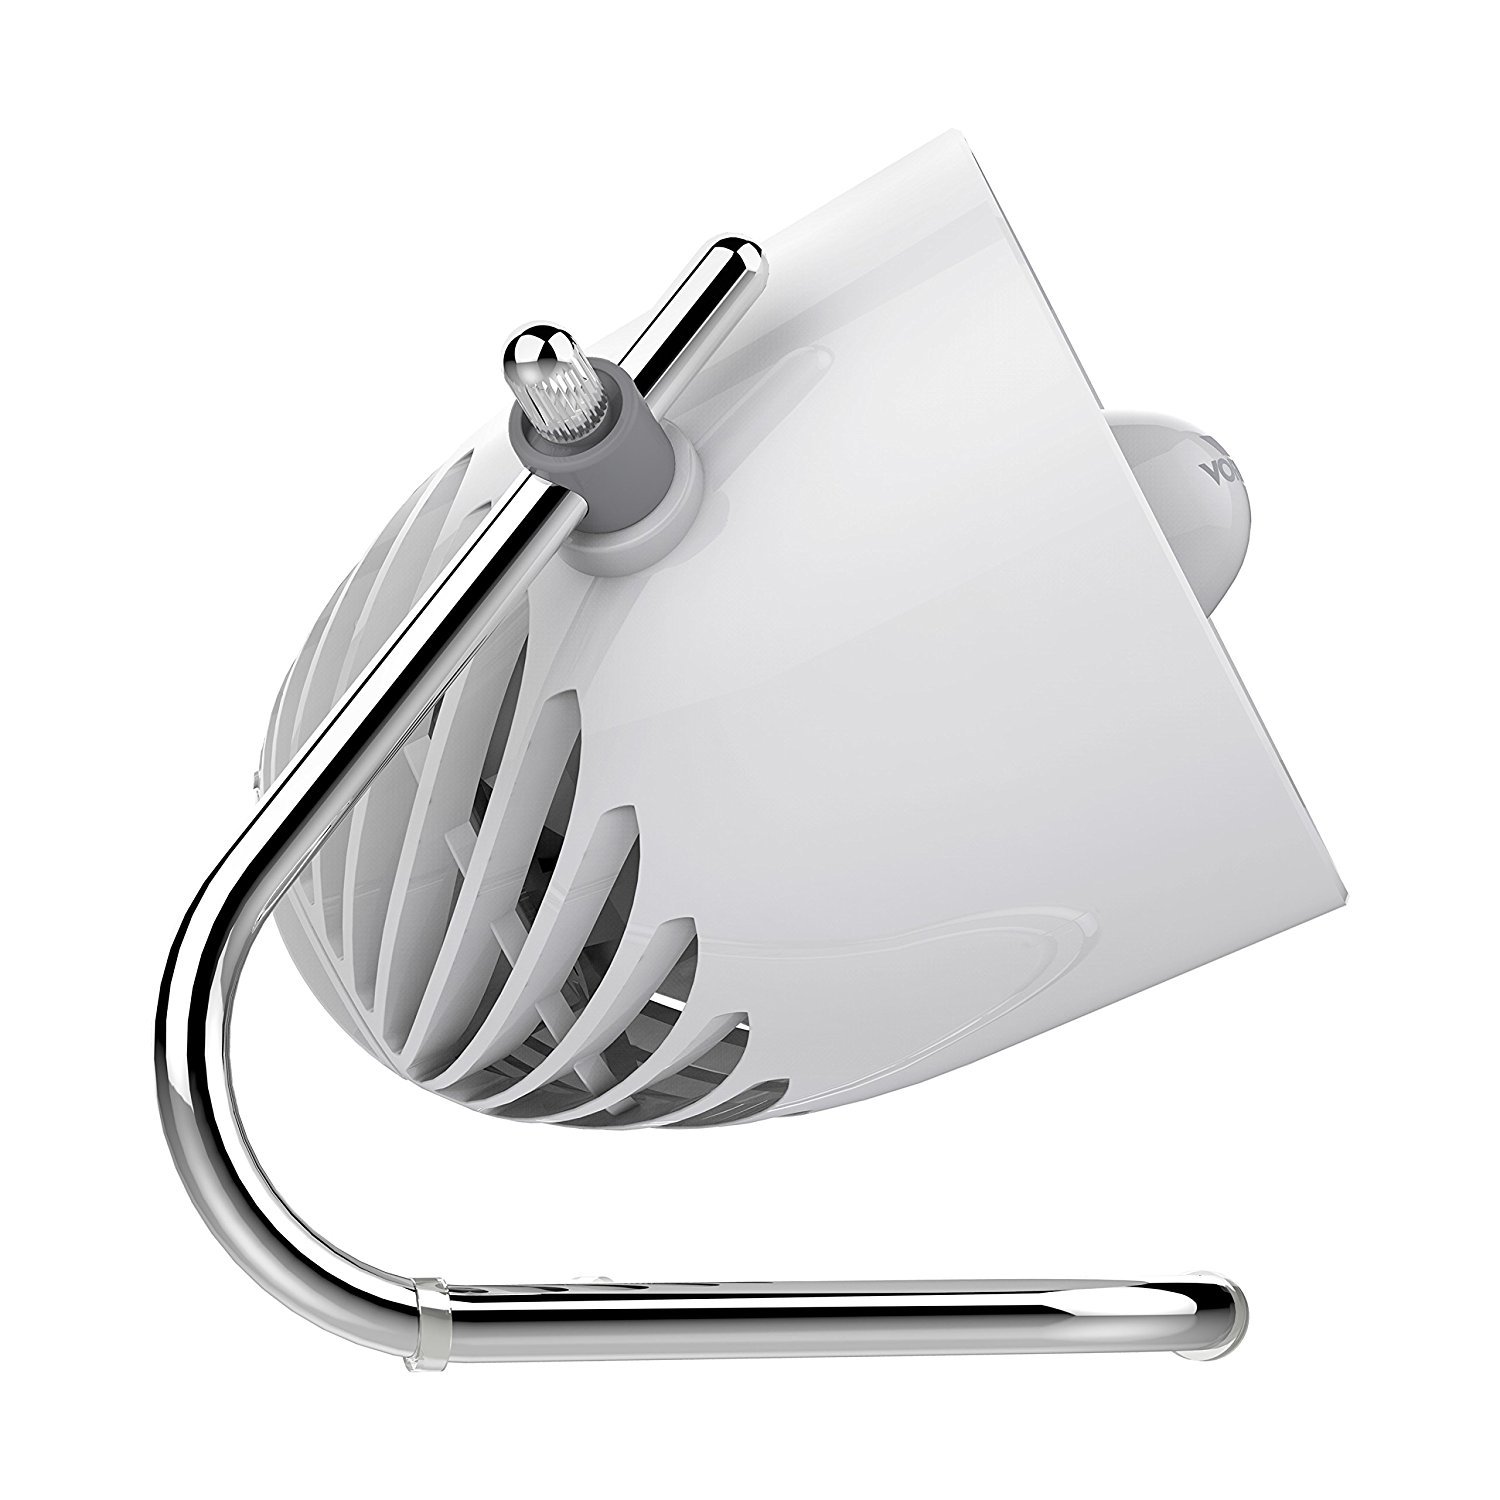 Vornado Personal Air Cooling Fan with Multiple Speeds